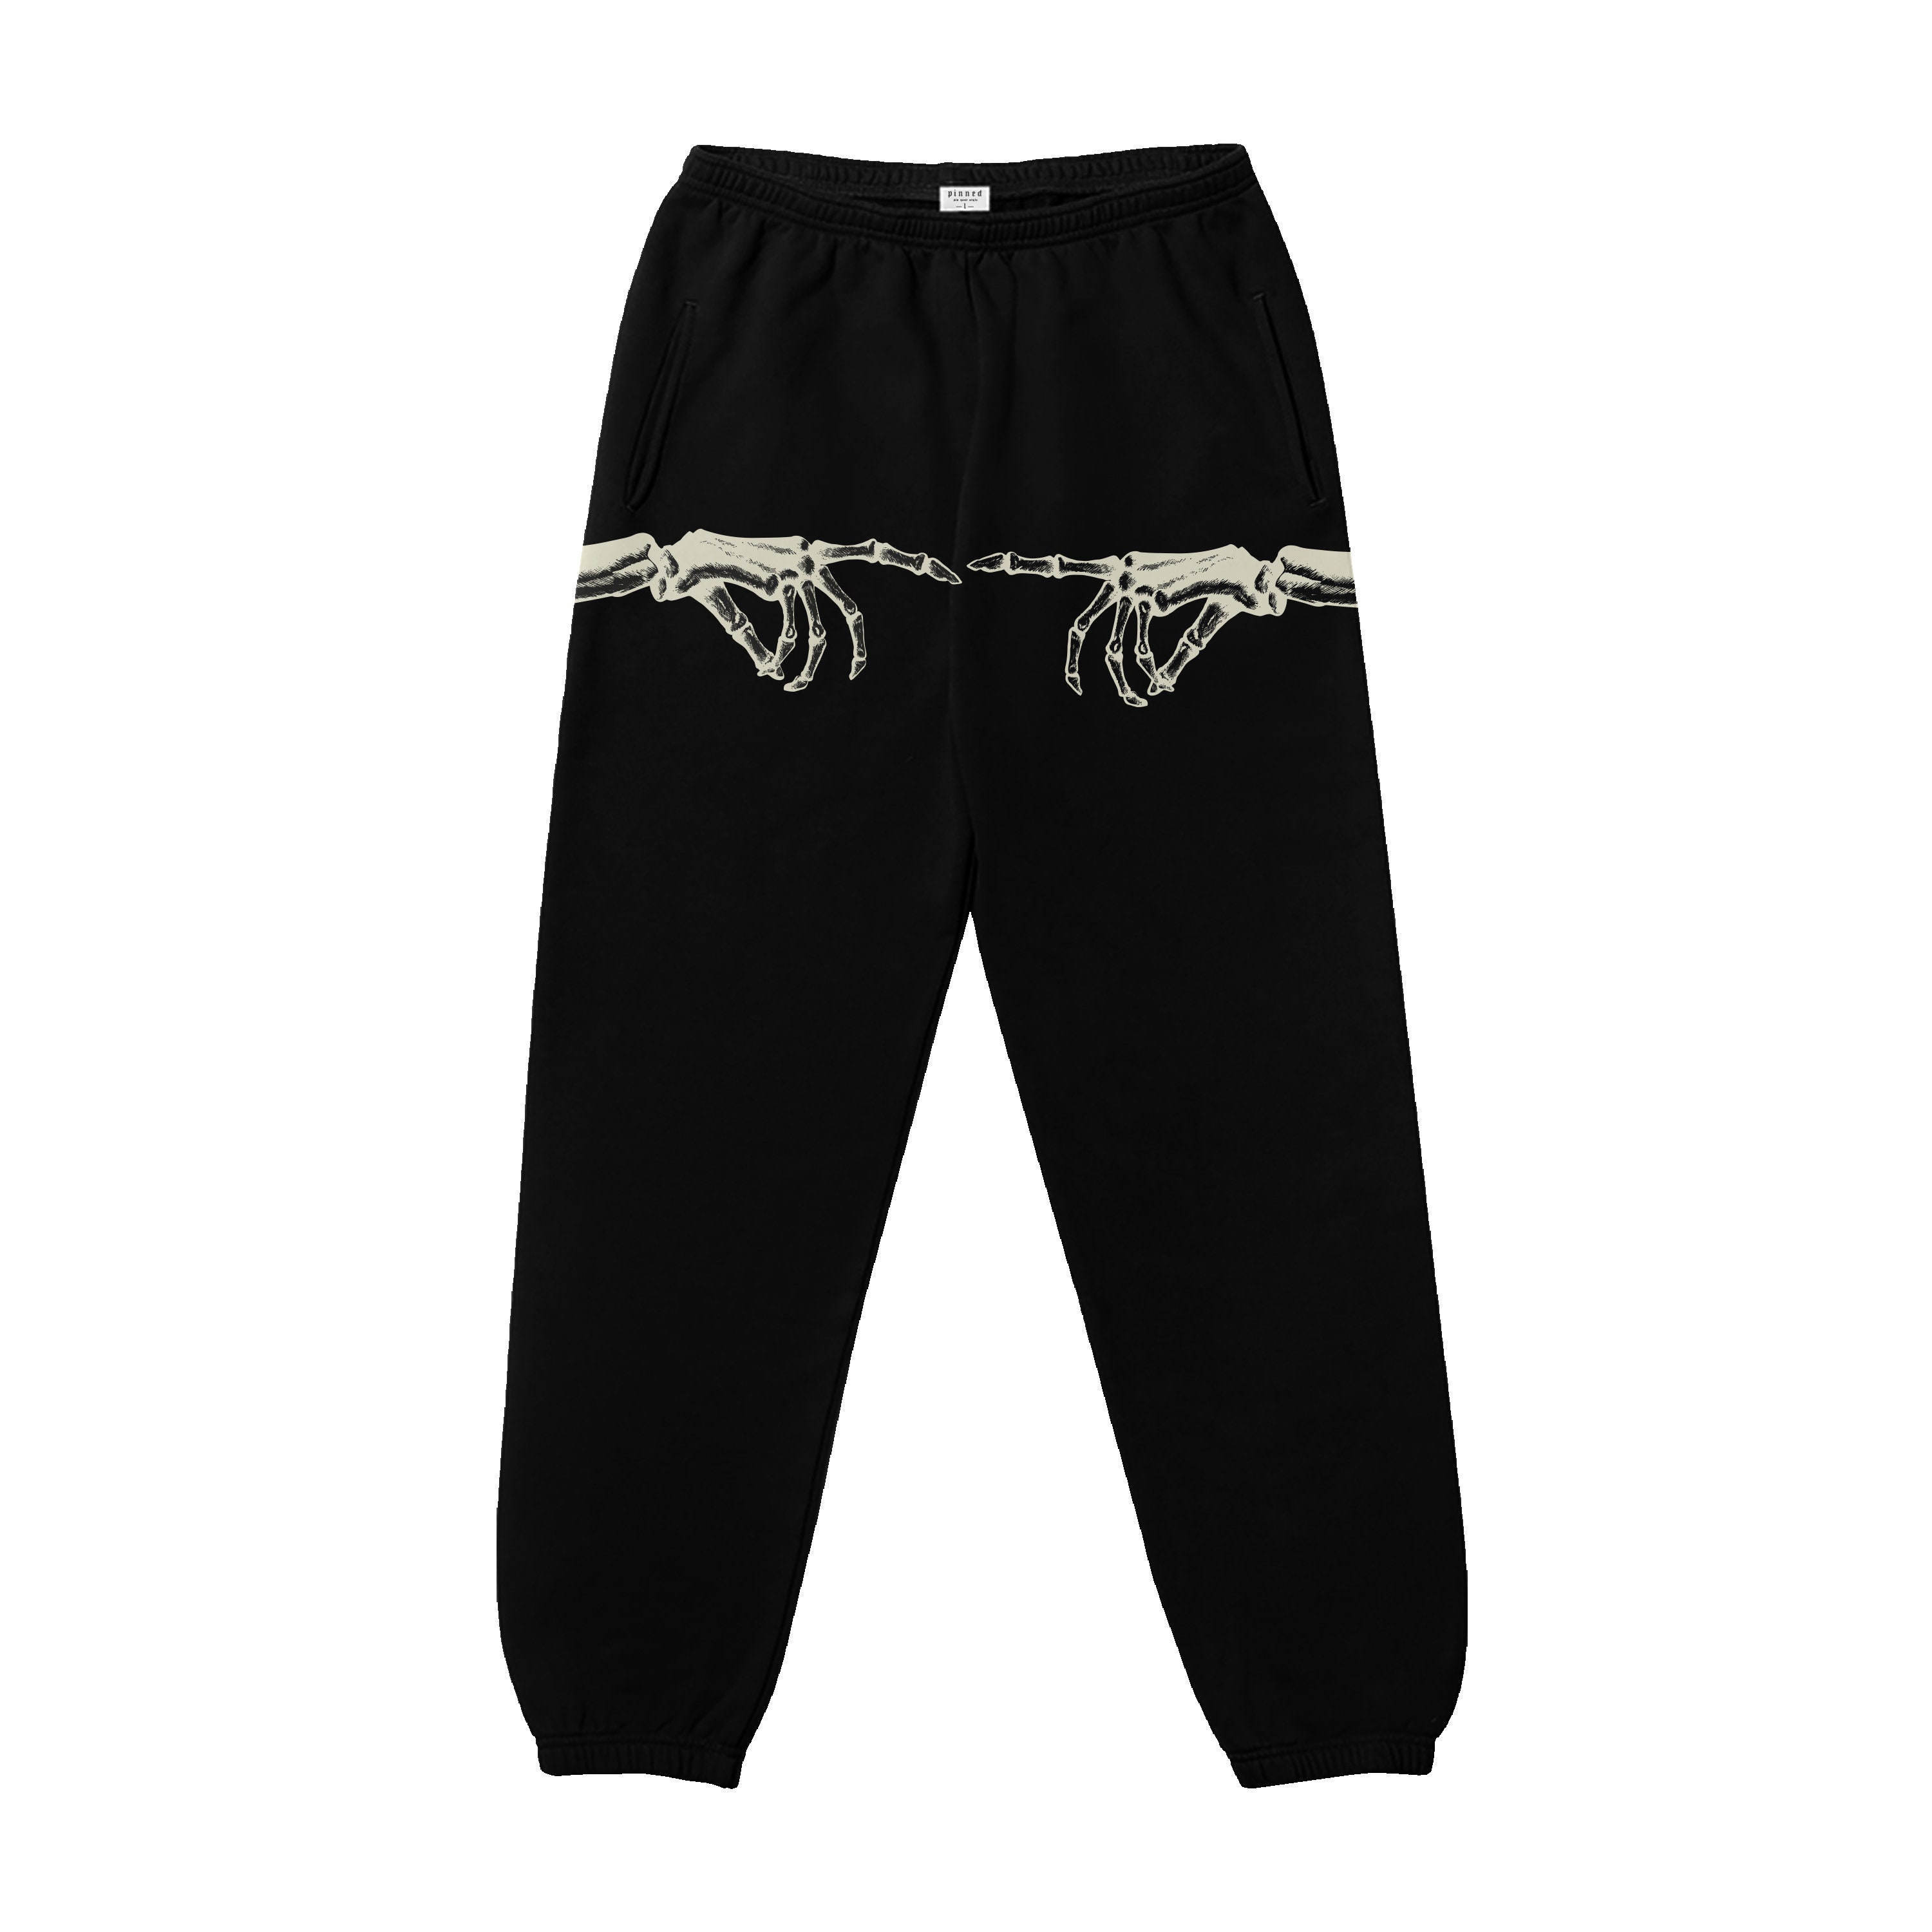 Black Woman Basic Tracksuit Sport Light Set Hoodie With Sweatpants  Sportswear Outfit 